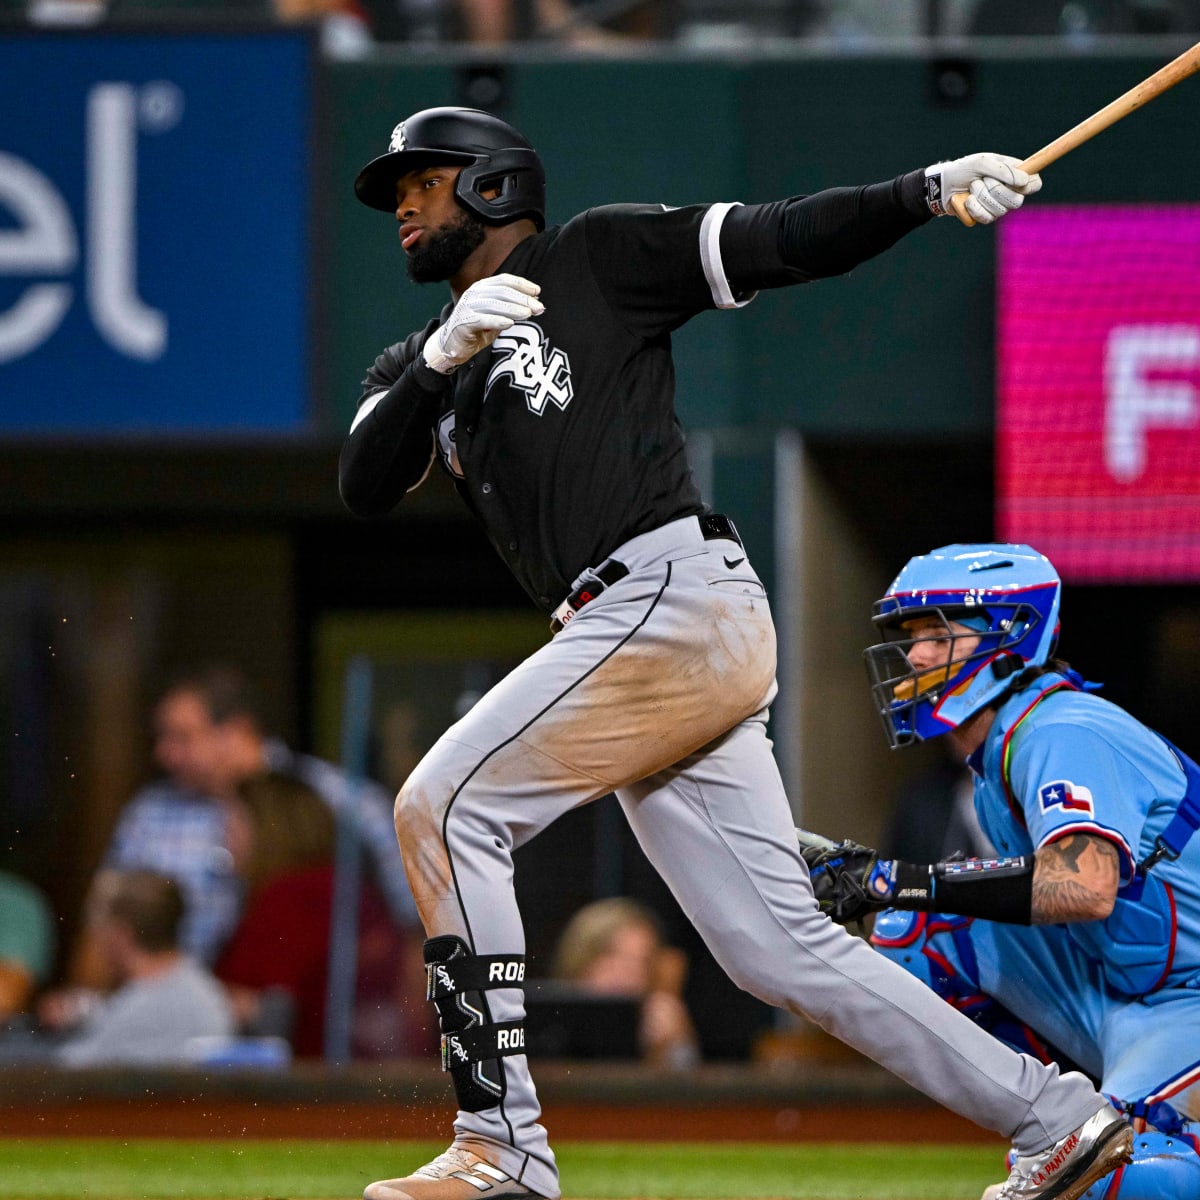 White Sox notes: Luis Robert leaves team for birth of child, players meet,  roster expands - Chicago Sun-Times